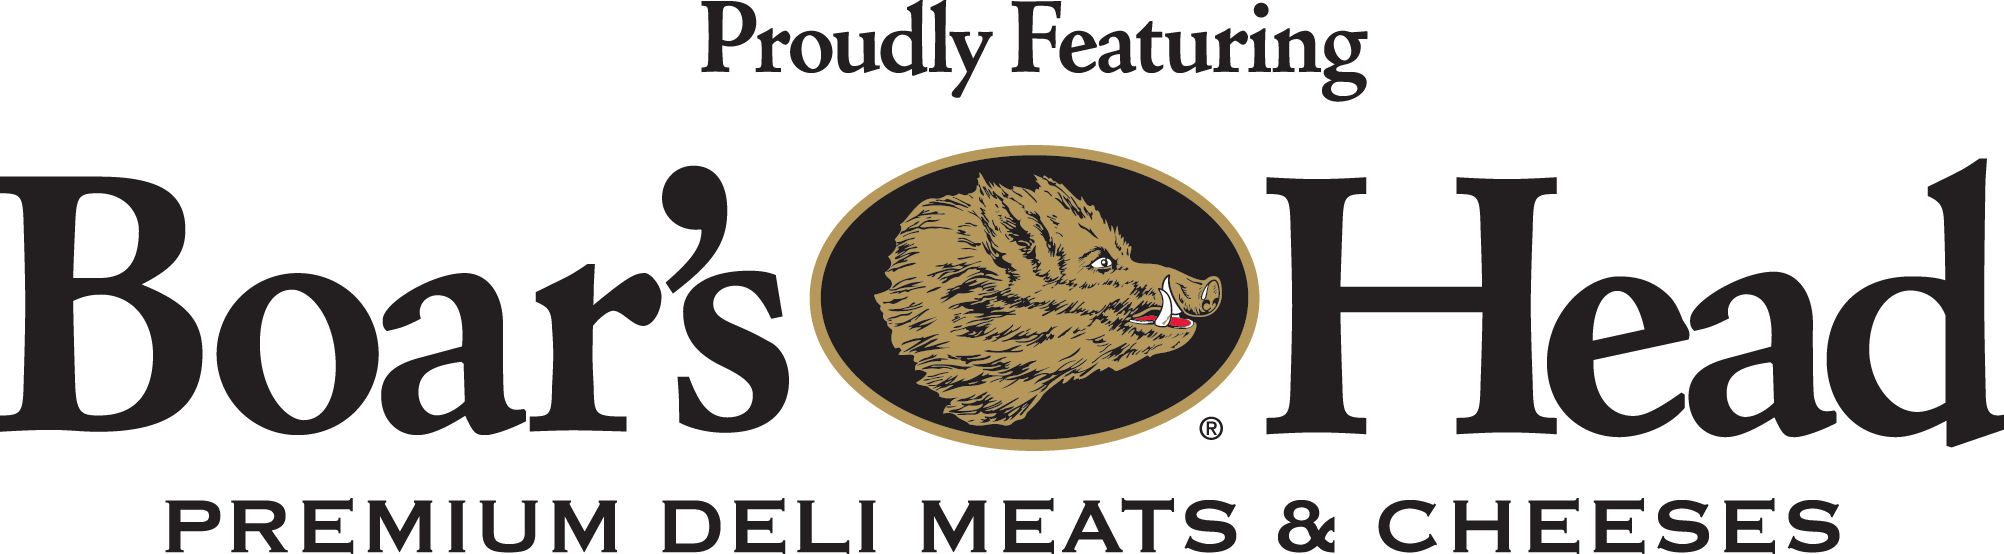 Proudly Featuring Boar's Head